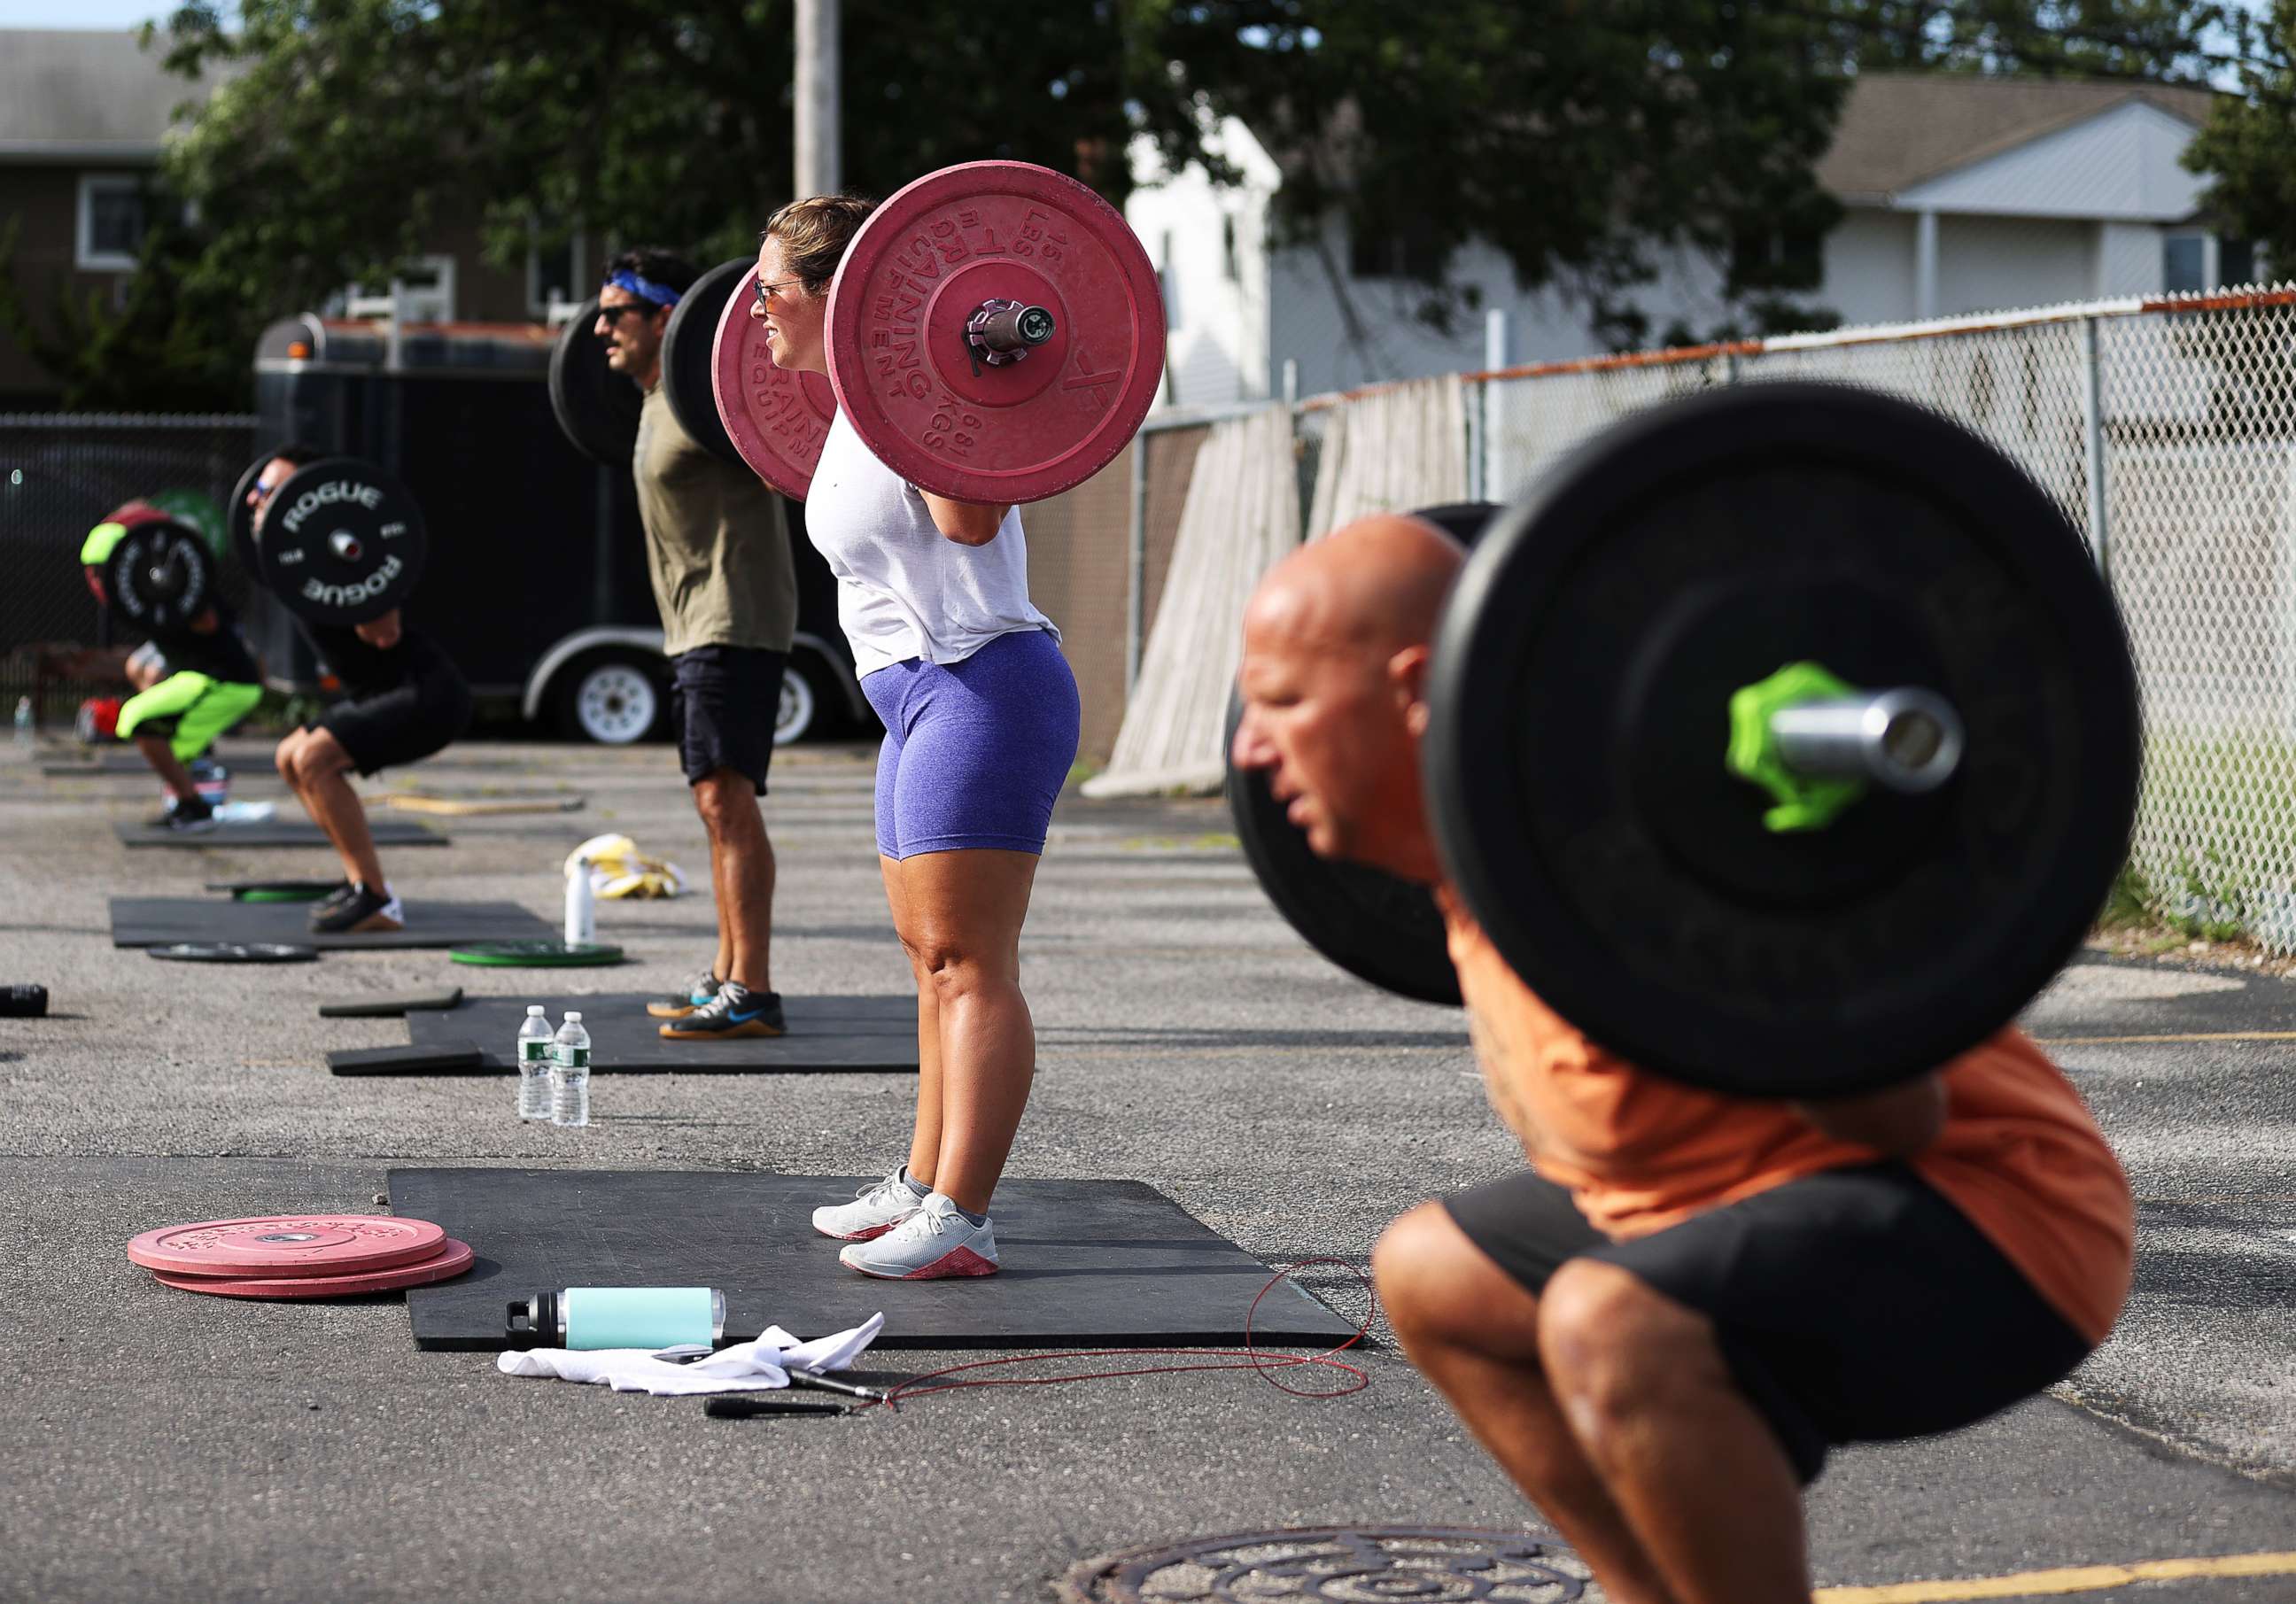 PHOTO: Taylor Wroblewski and her Dad Frank squat during an outdoor Jetty Gym "Outside The Box" fitness workout, July 20, 2020, in Oceanside, New York.